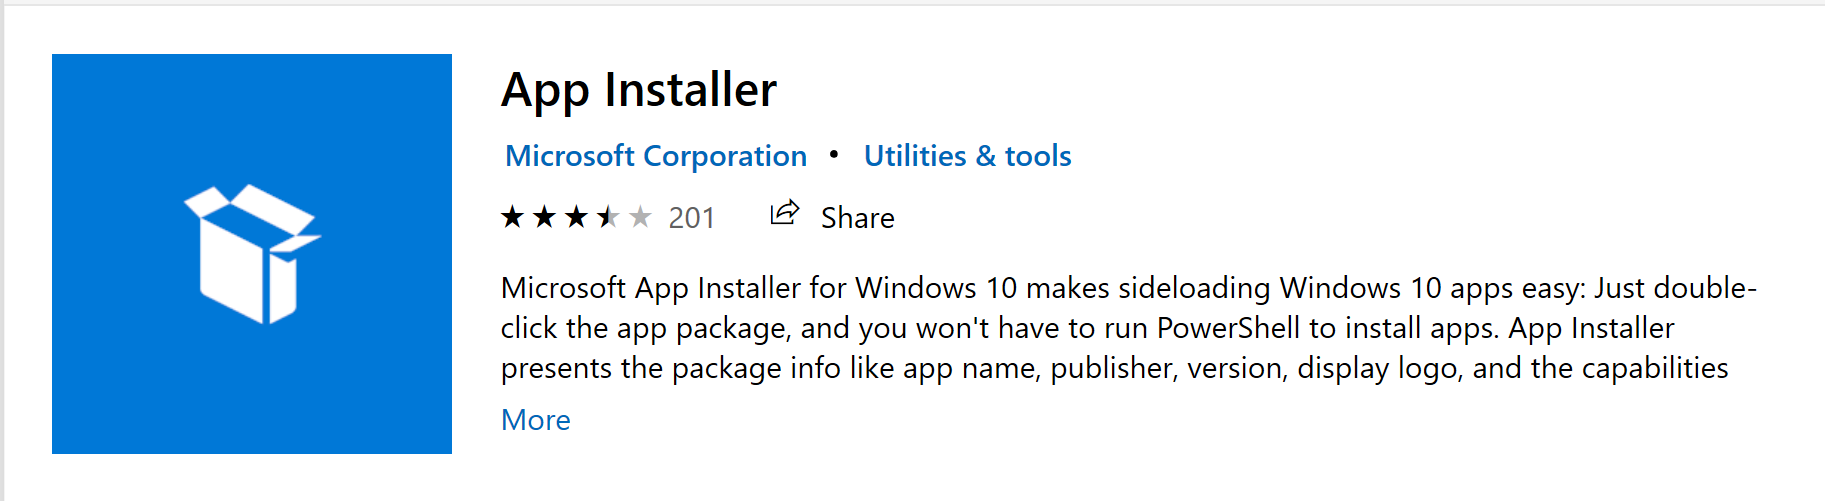 Windows 11 Manager 1.2.8 download the new for apple